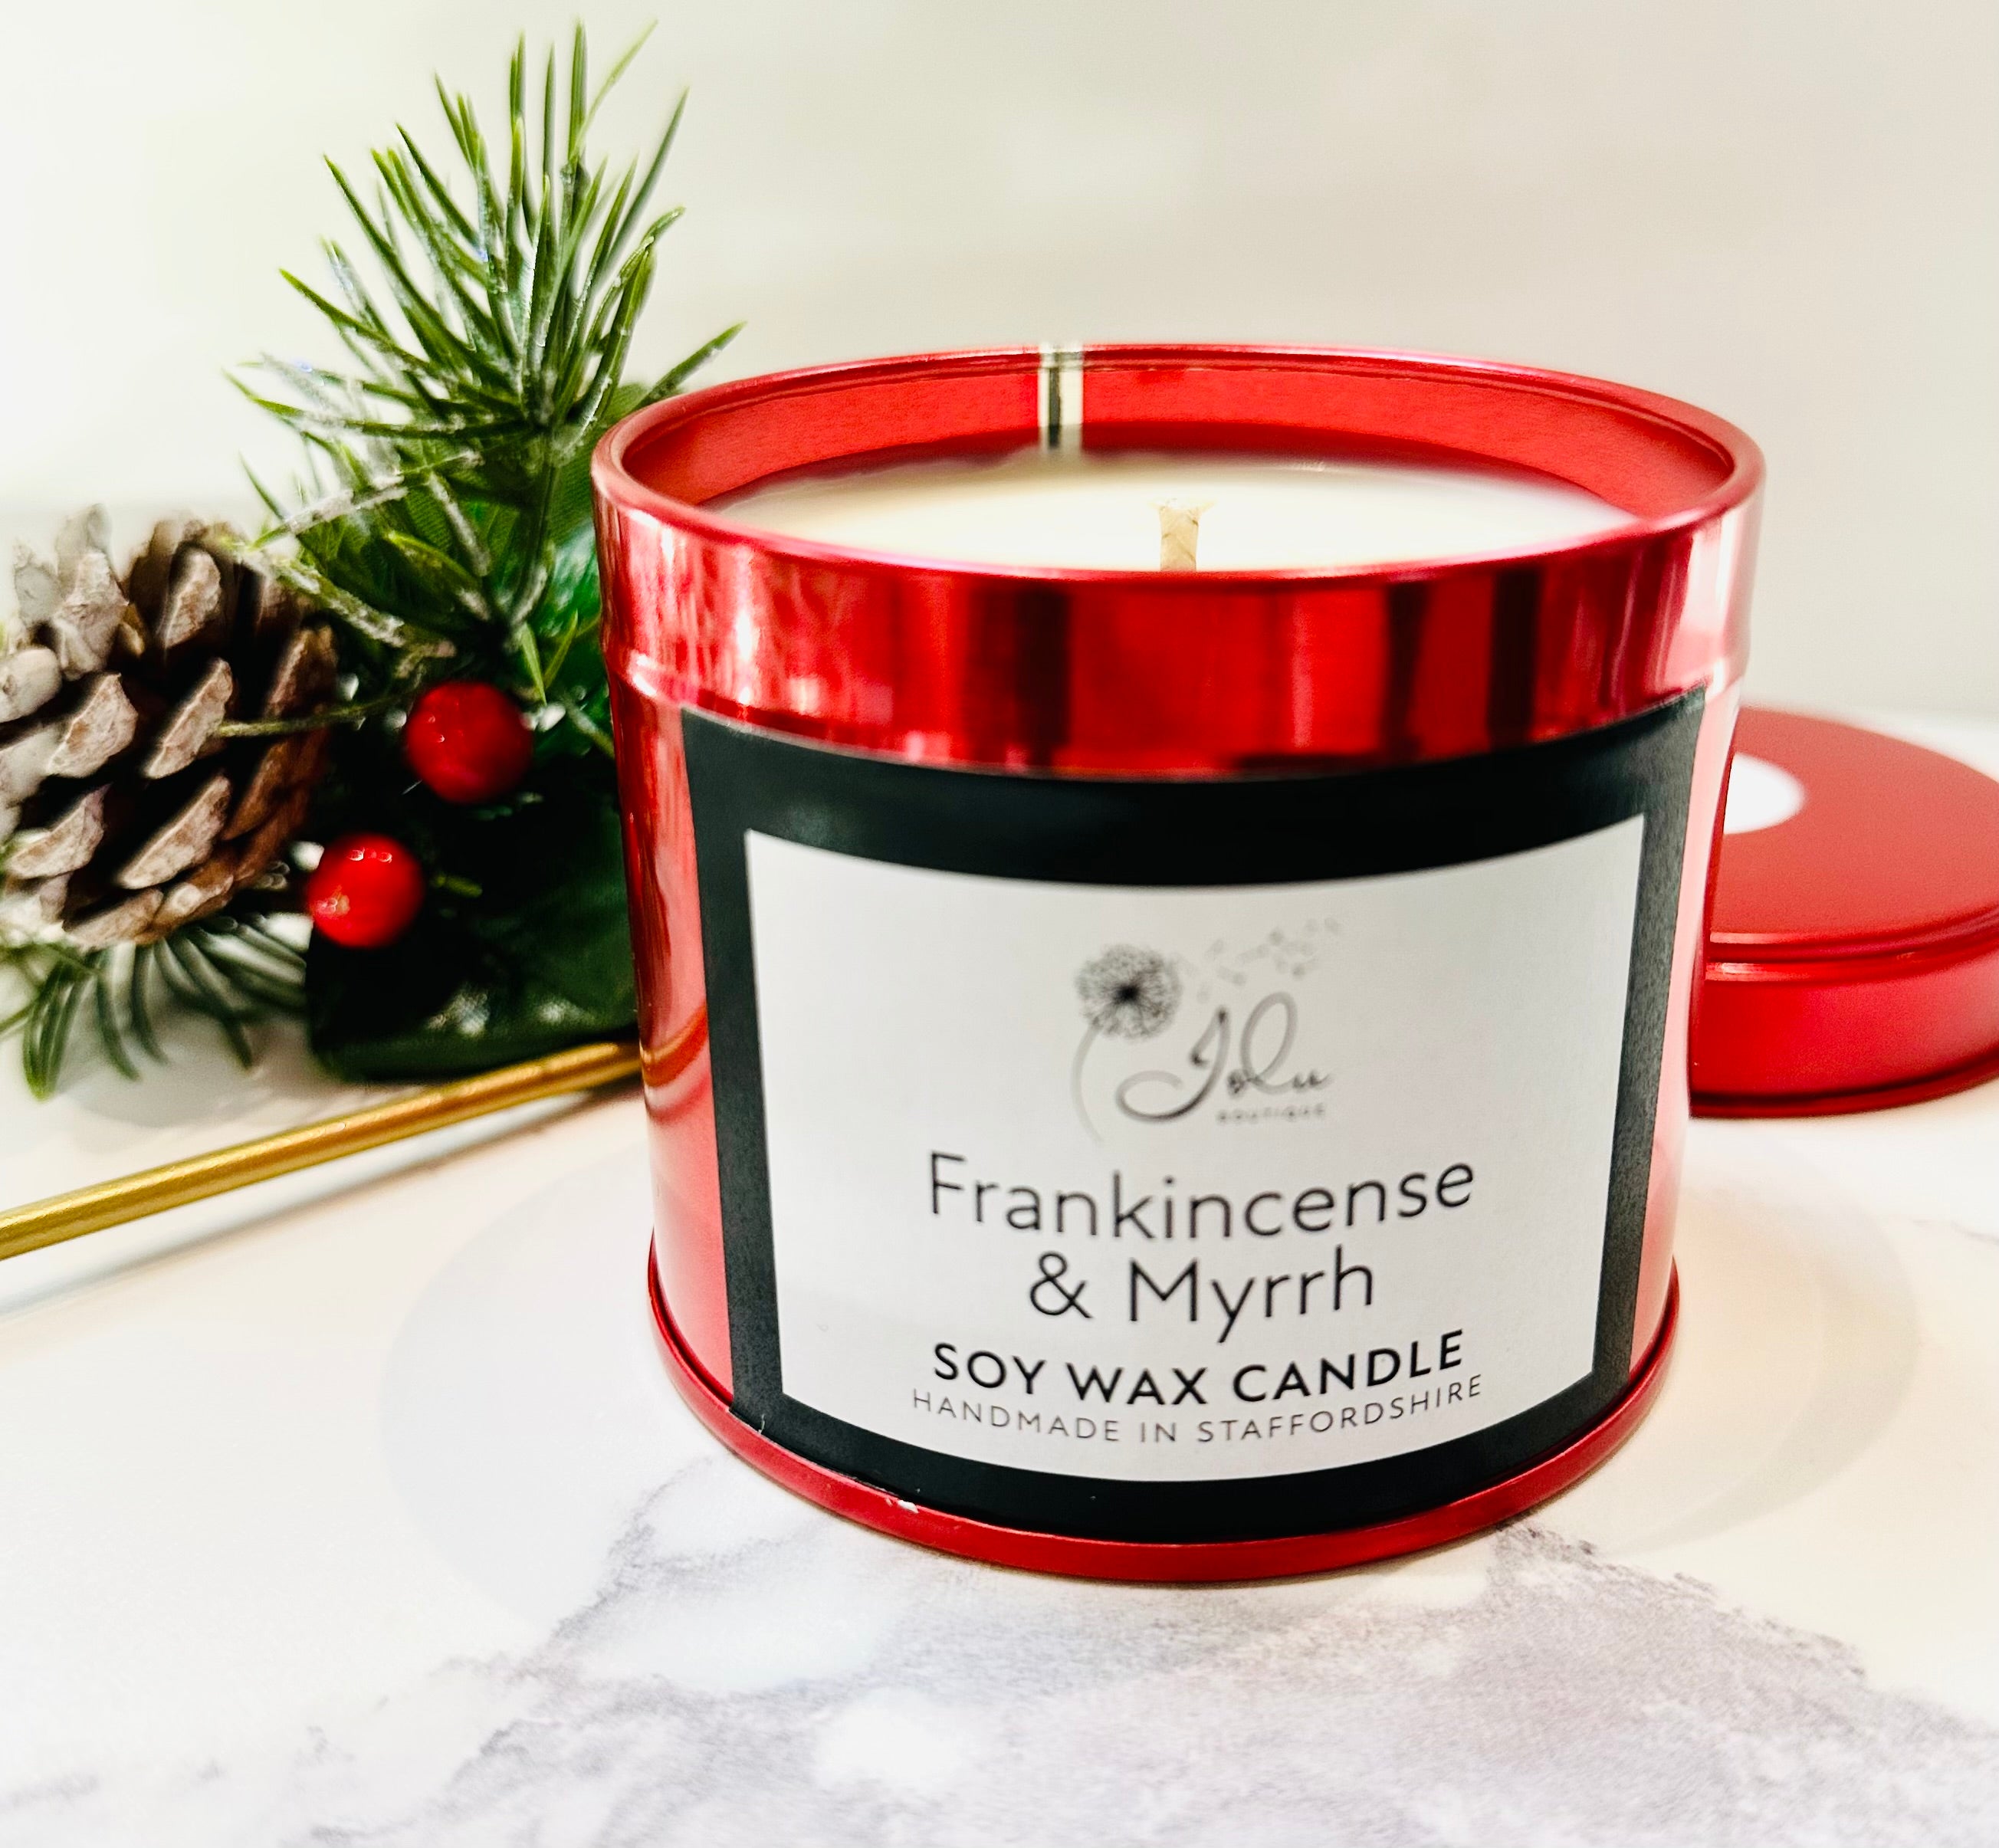 Gold, Frankincense and Myrrh Christmas Candle  Charity Gifts – Embrace the  Middle East Trading